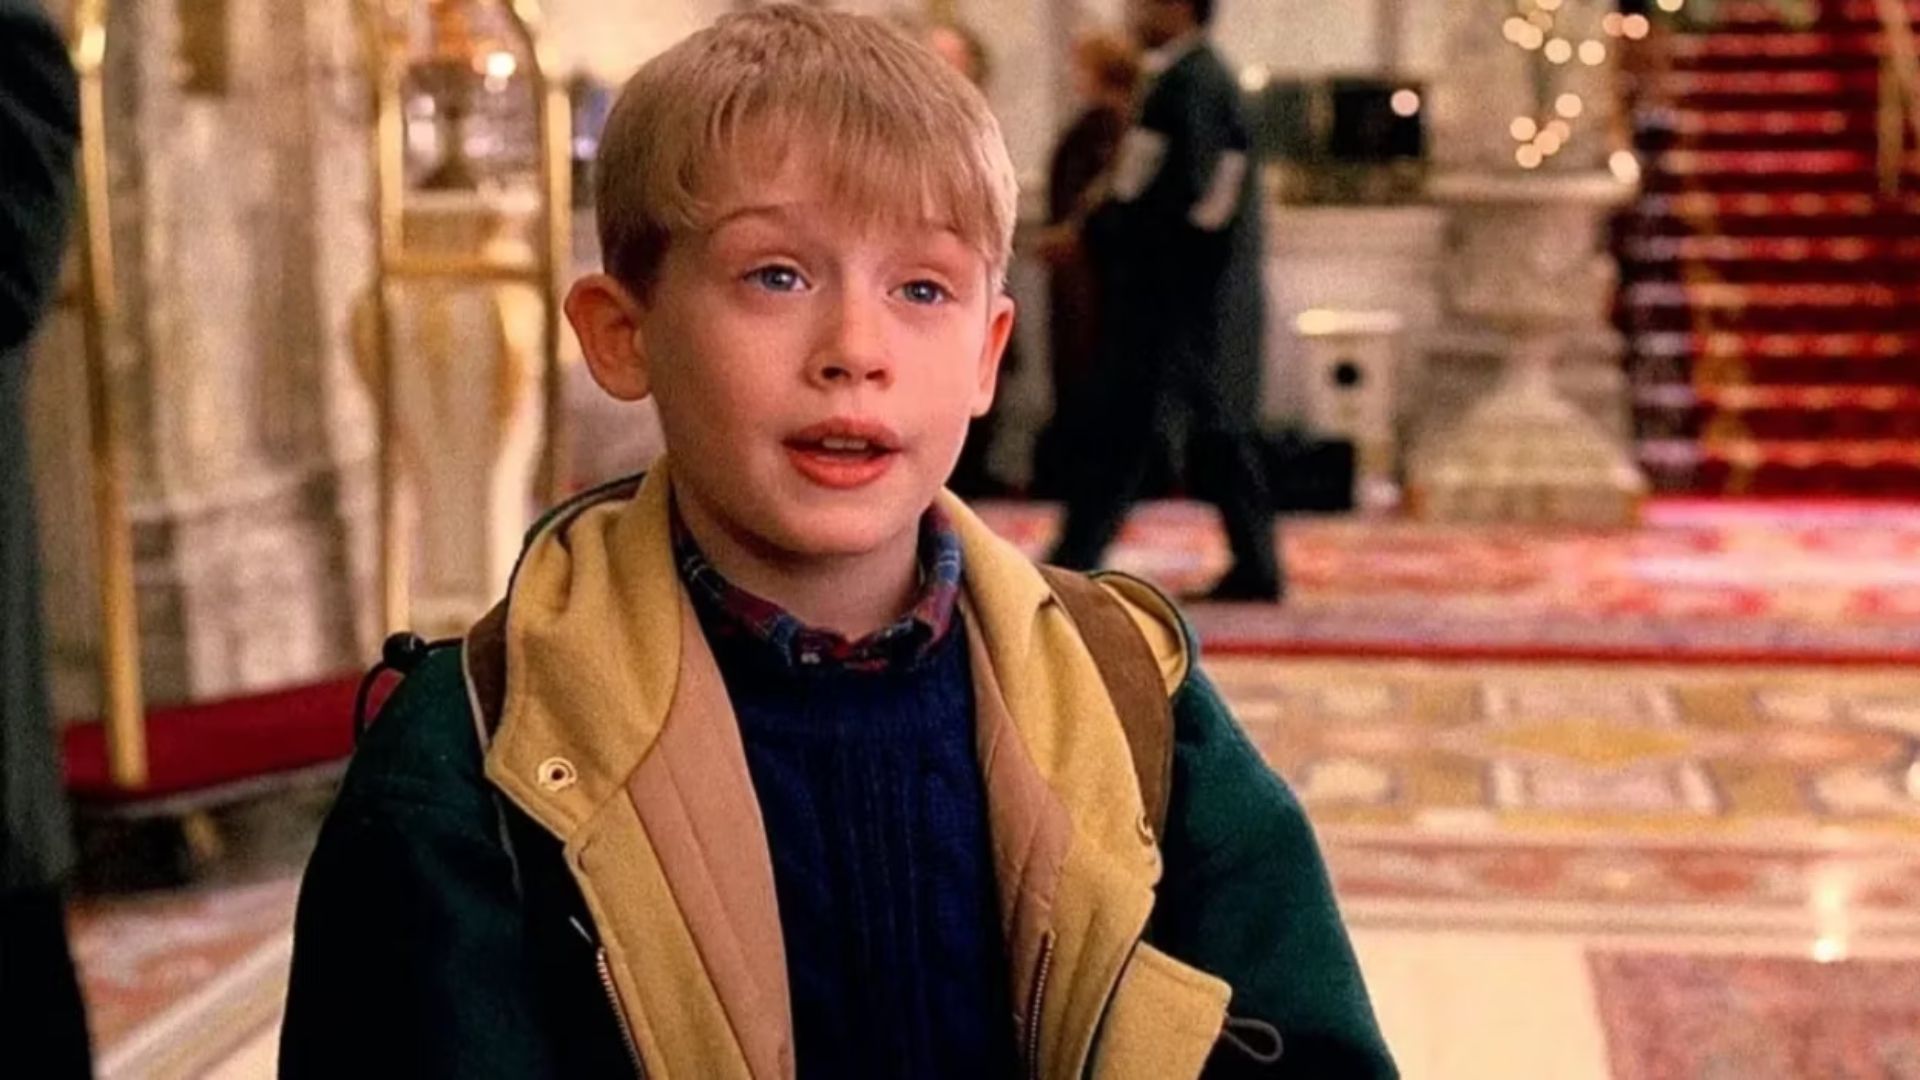 Macaulay Culkin as Kevin McCallister in Home Alone 2: Lost in New York (1992)